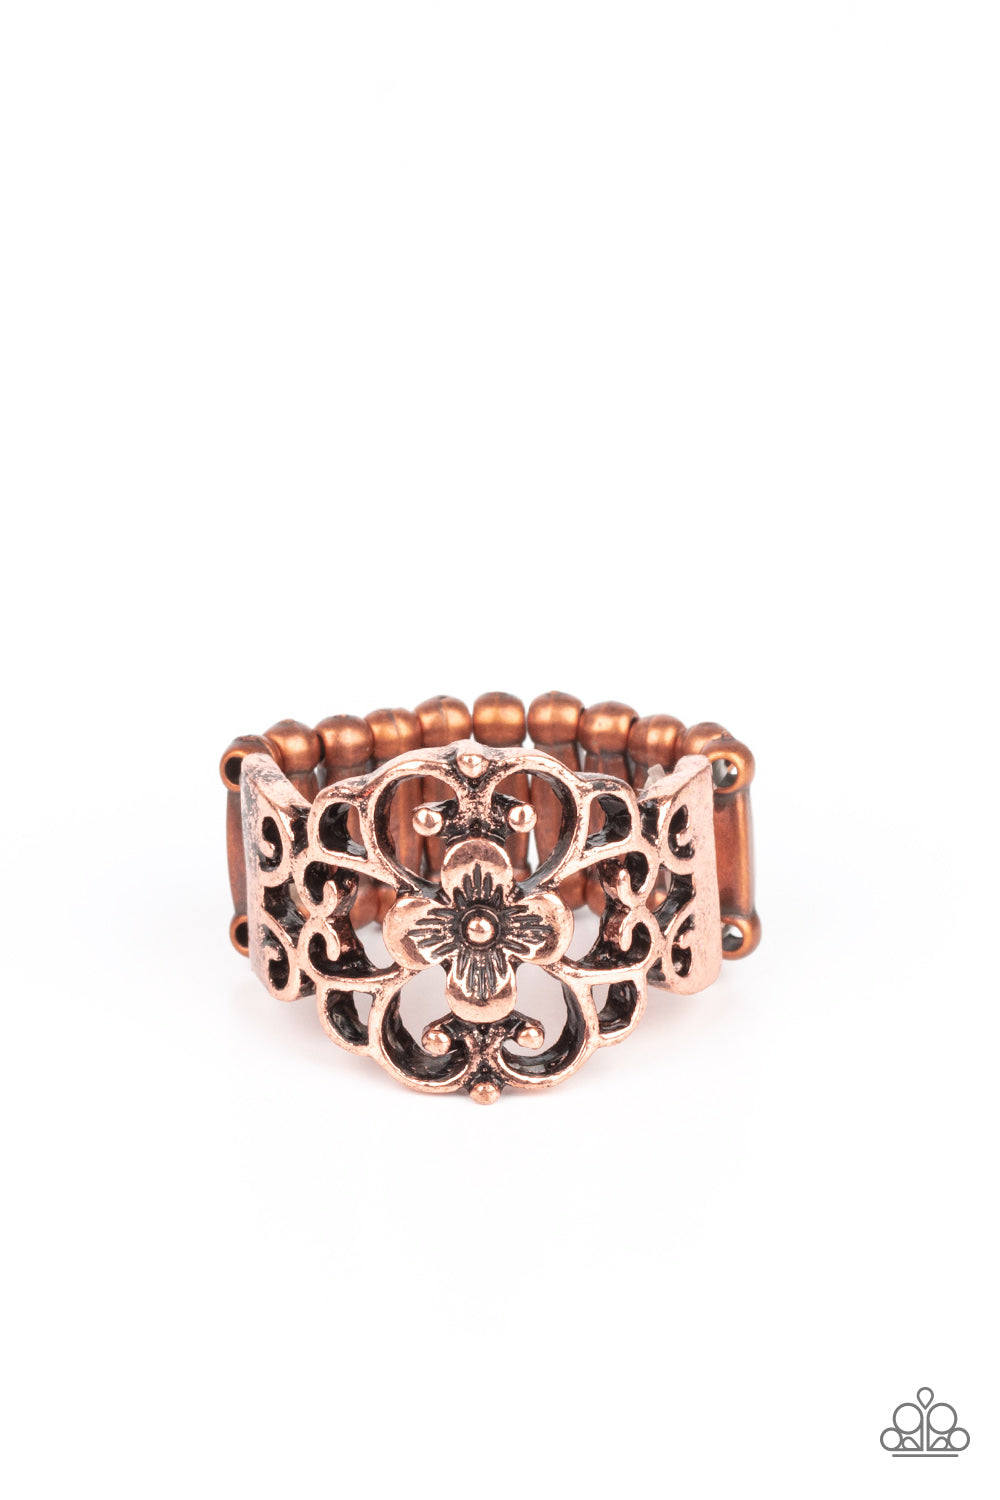 Fanciful Flower Gardens - copper - Paparazzi ring